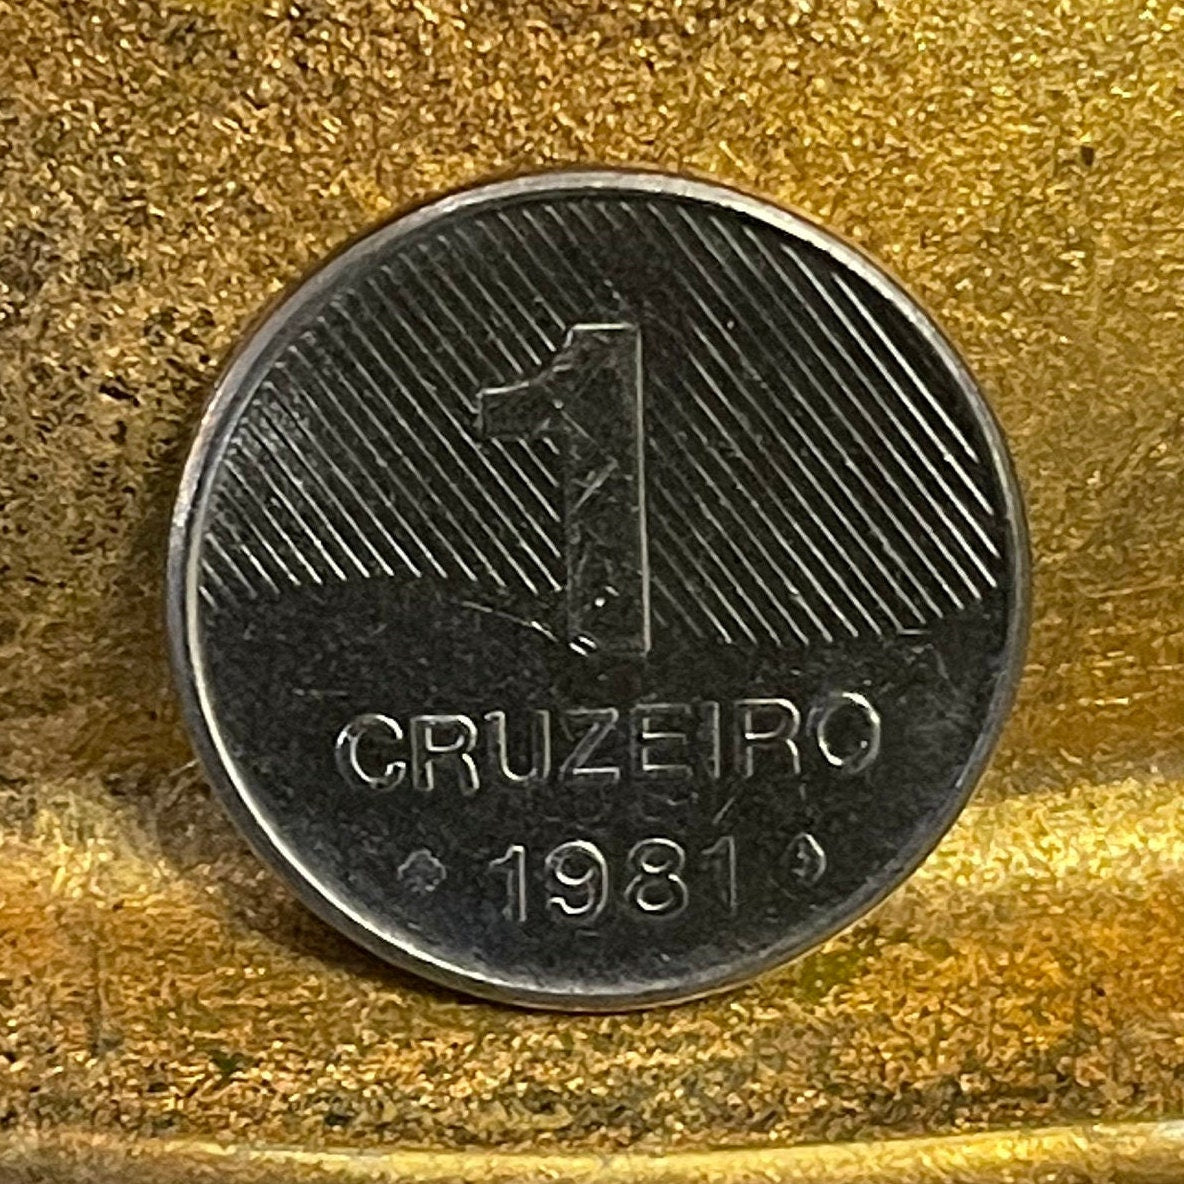 Sugar Cane 1 Cruzeiro Brazil Authentic Coin Money for Jewelry and Craft Making